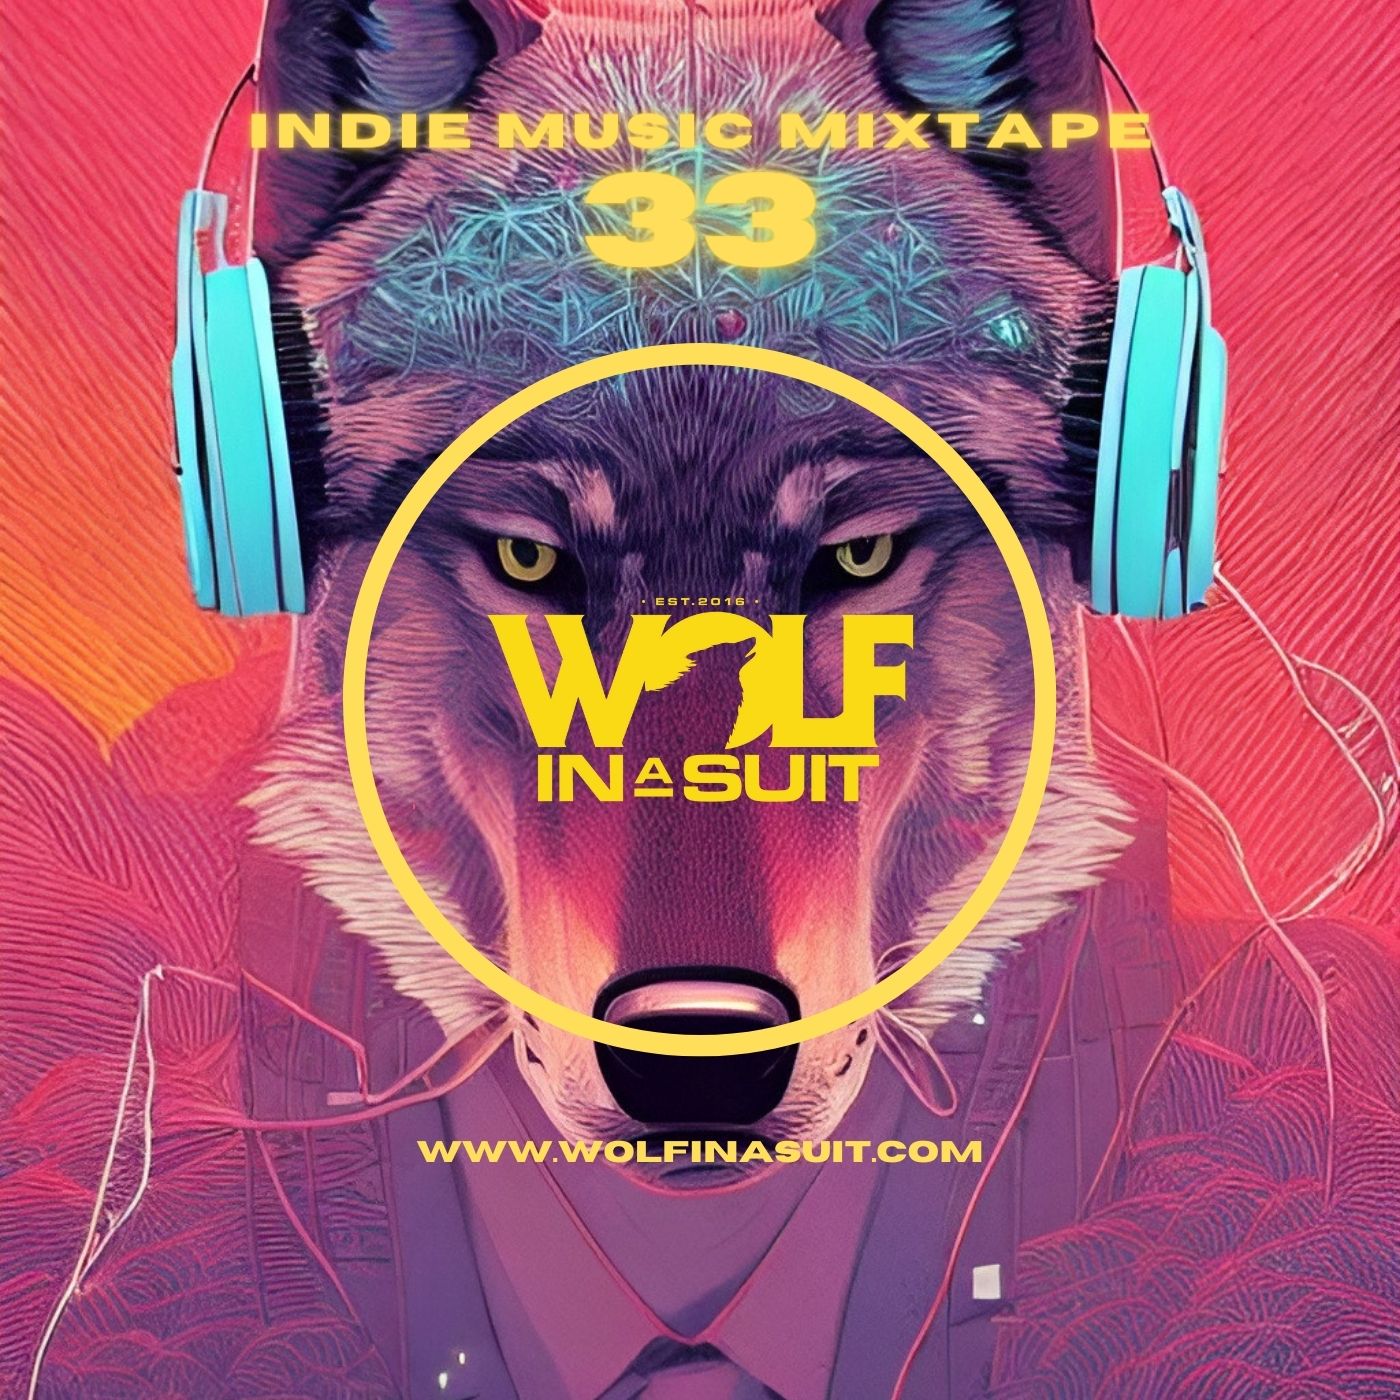 indie music mixtape 33 - uk - canada - france - usa - indie - indie music - indie pop - indie rock - indie folk - new music - music blog - wolf in a suit - wolfinasuit - wolf in a suit blog - wolf in a suit music blog